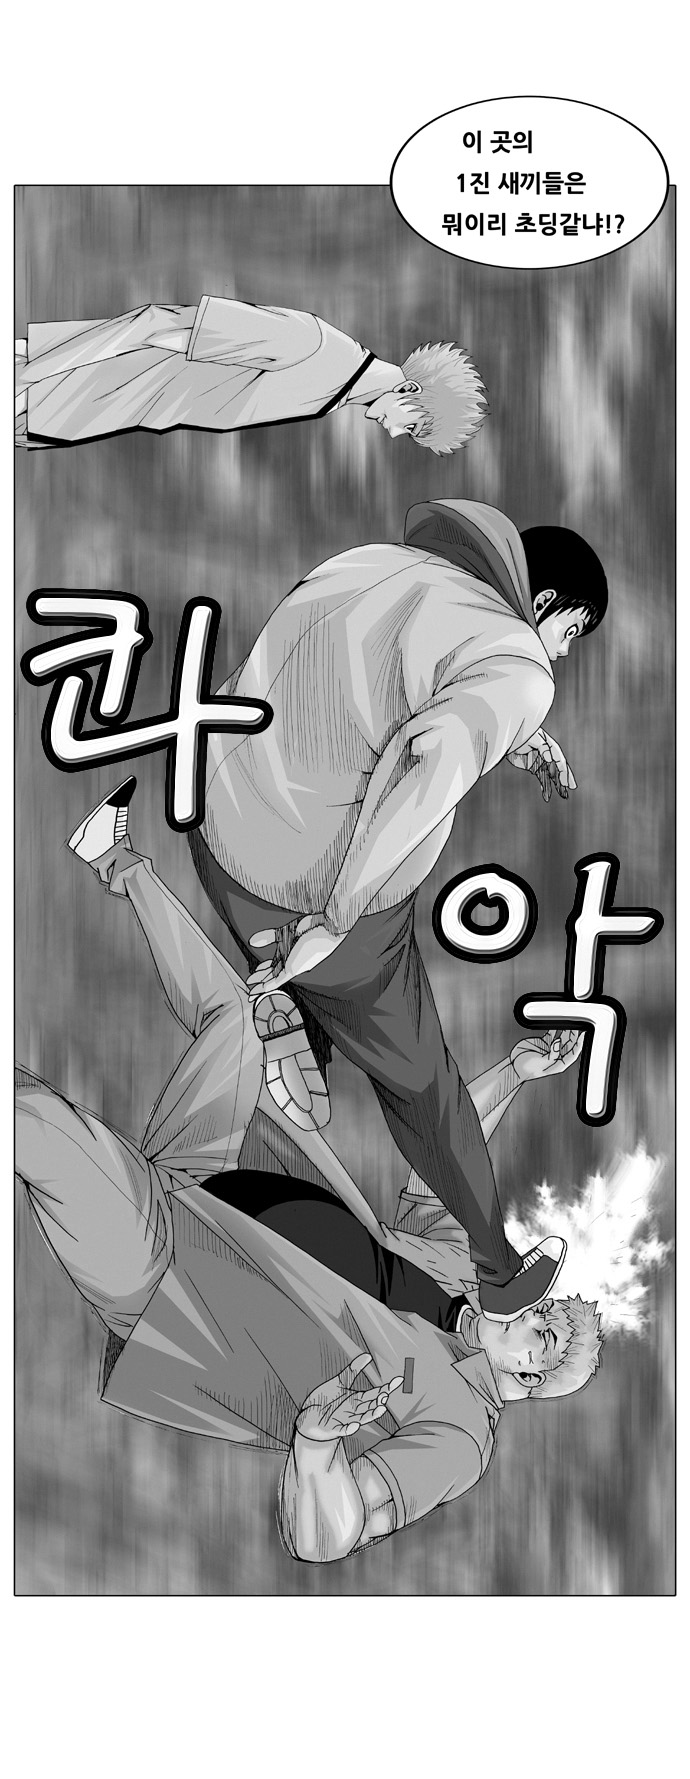 Ultimate Legend - Kang Hae Hyo - Chapter 32 - Page 1